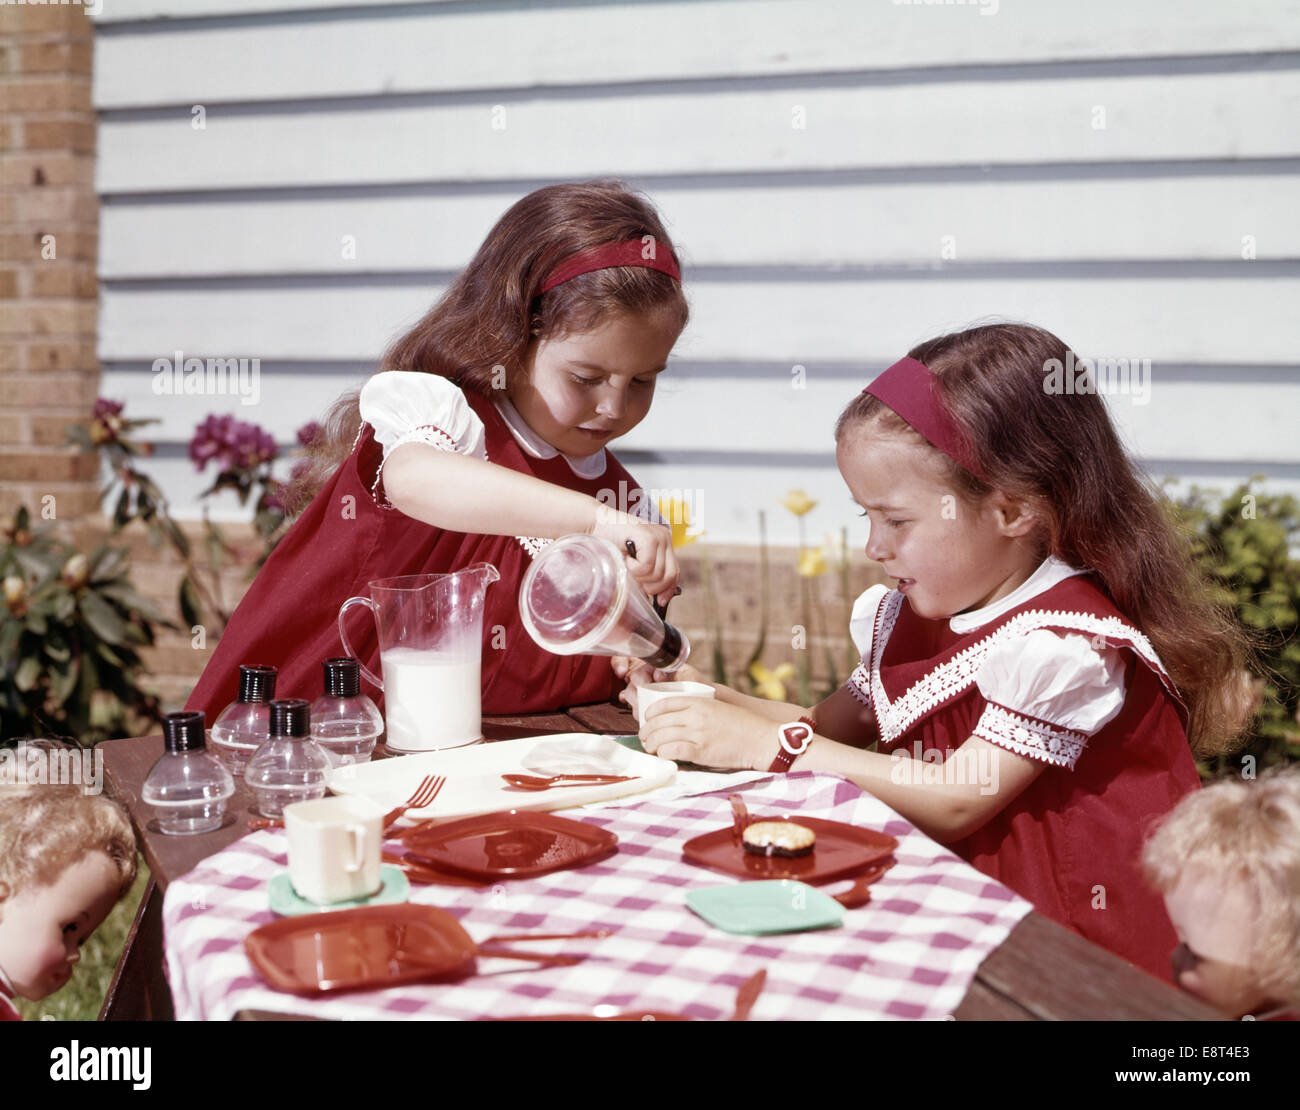 1960s TWIN GIRLS HAVING A TEA PARTY MILK AND COOKIES Stock Photo